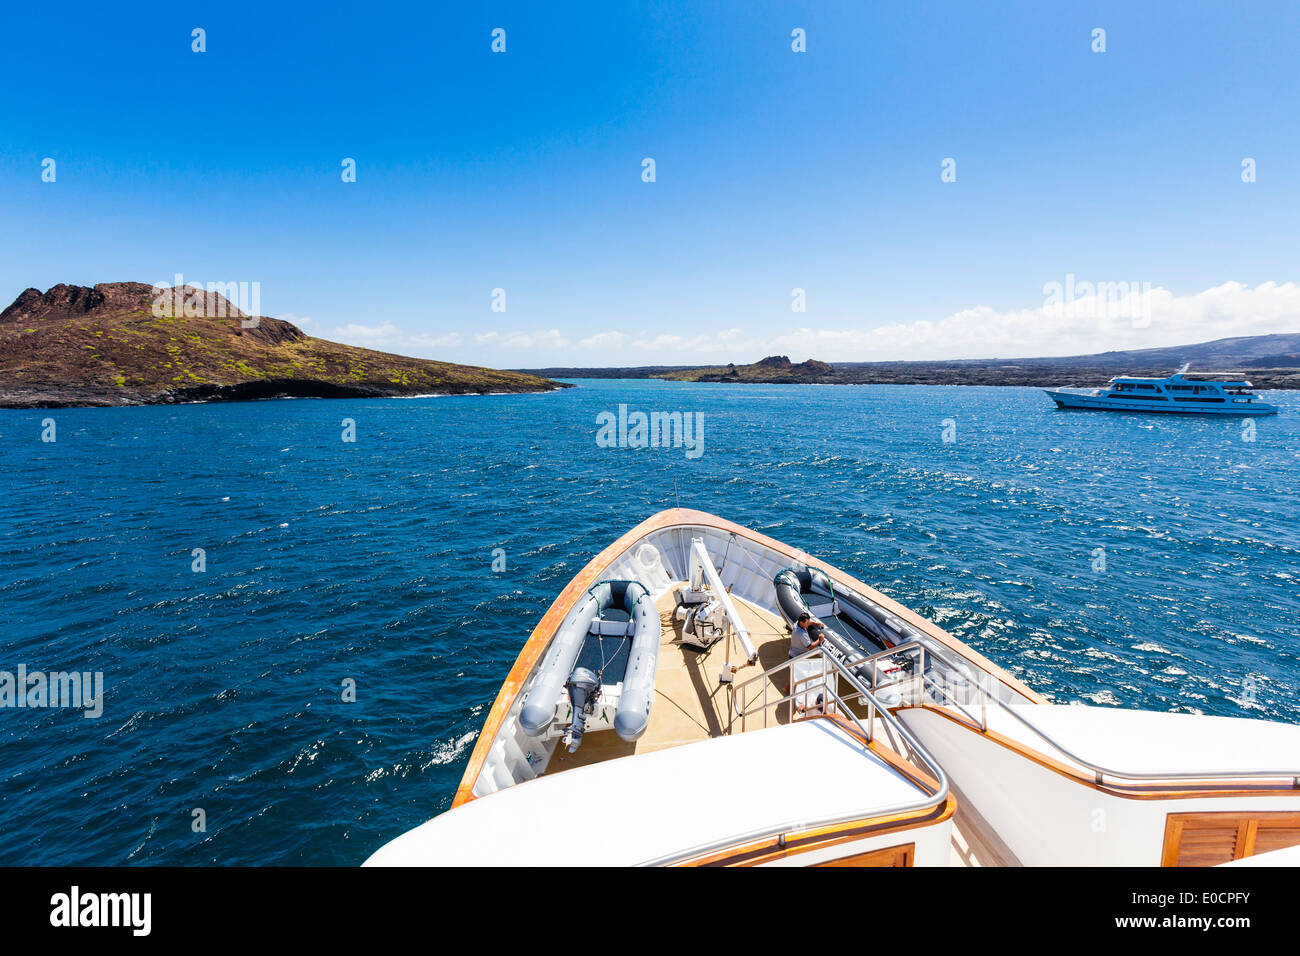 The islands Sombrero Chino (chinese hat) and Isla Santiago seen from a ship, Galapagos, Ecuador, South America Stock Photo